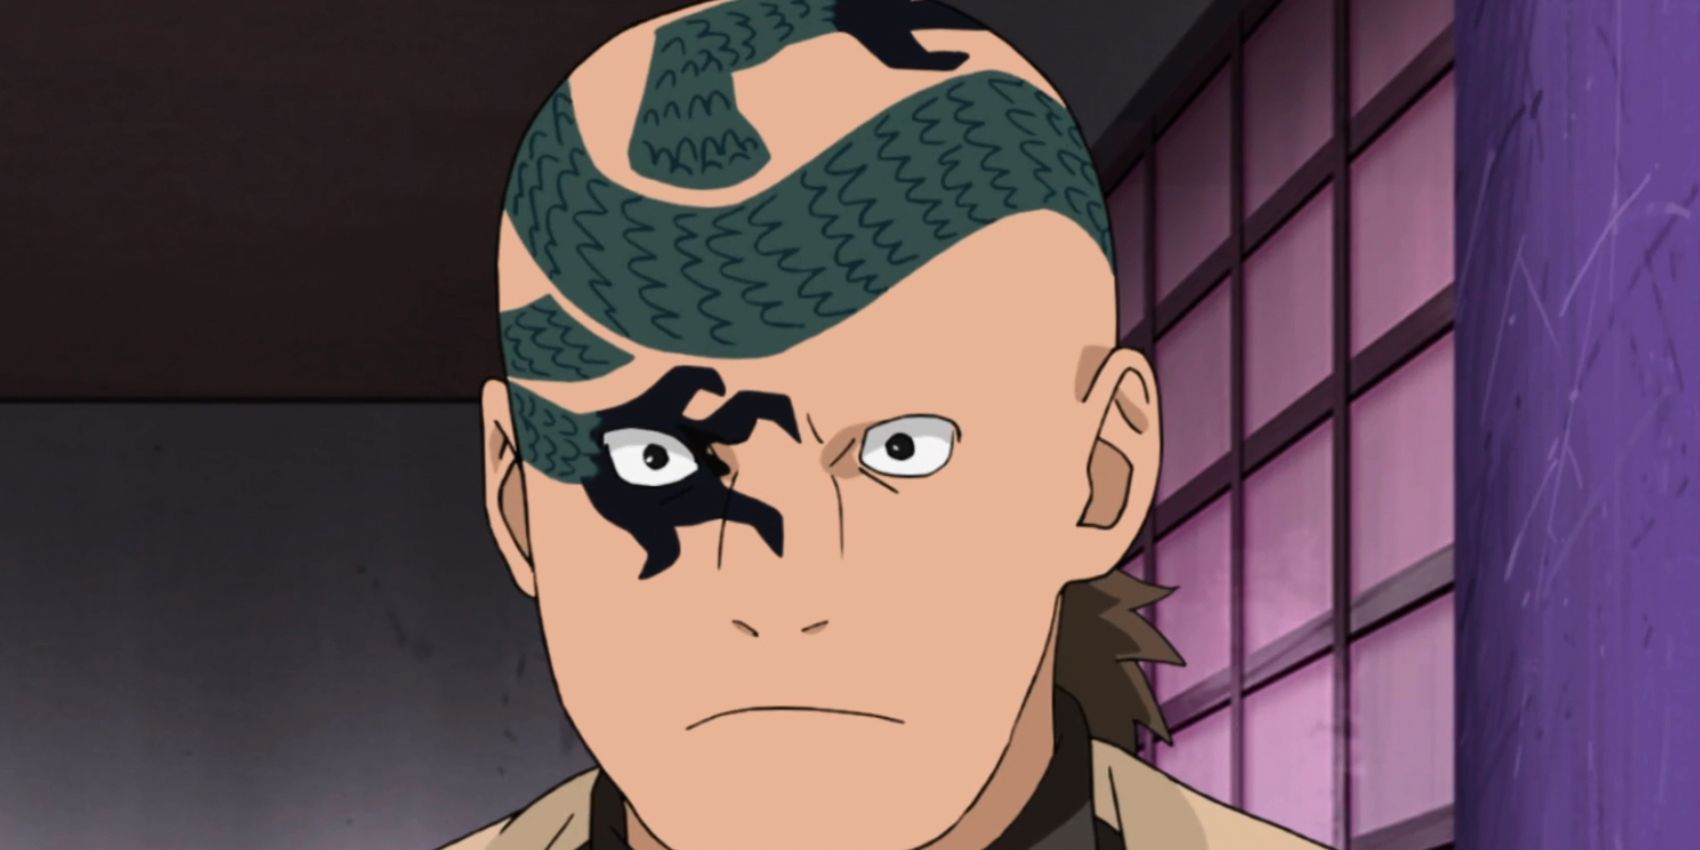 The Second Kazekage Shamon has a tattoo of a dragon-like being on his head